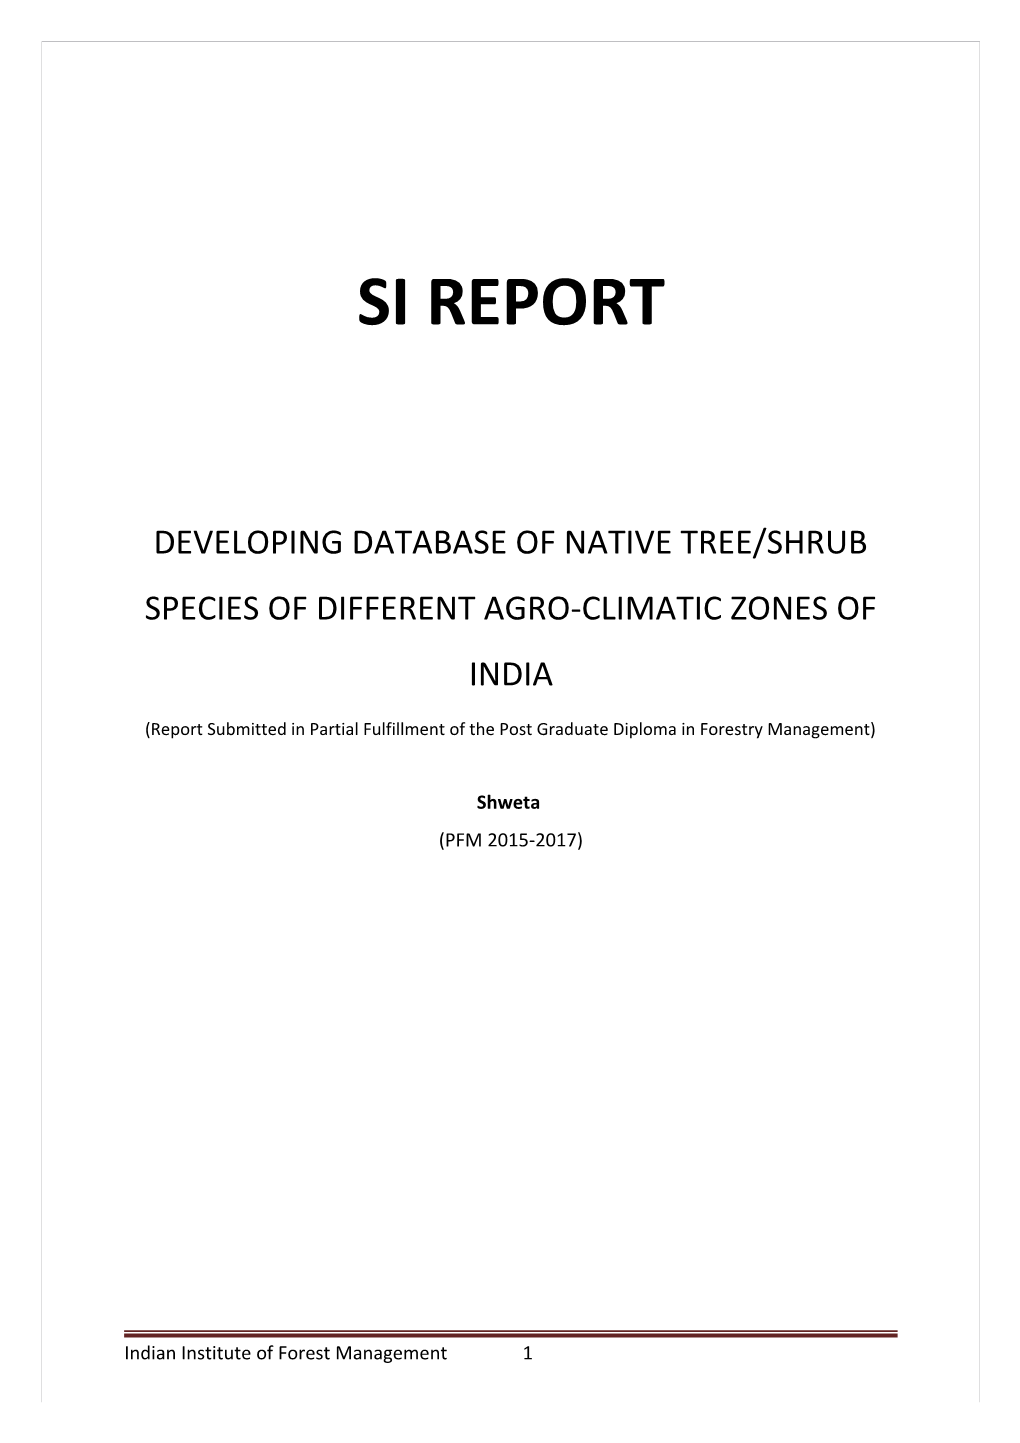 Developing Database of Native Tree/Shrub Species of Different Agro-Climatic Zones of India